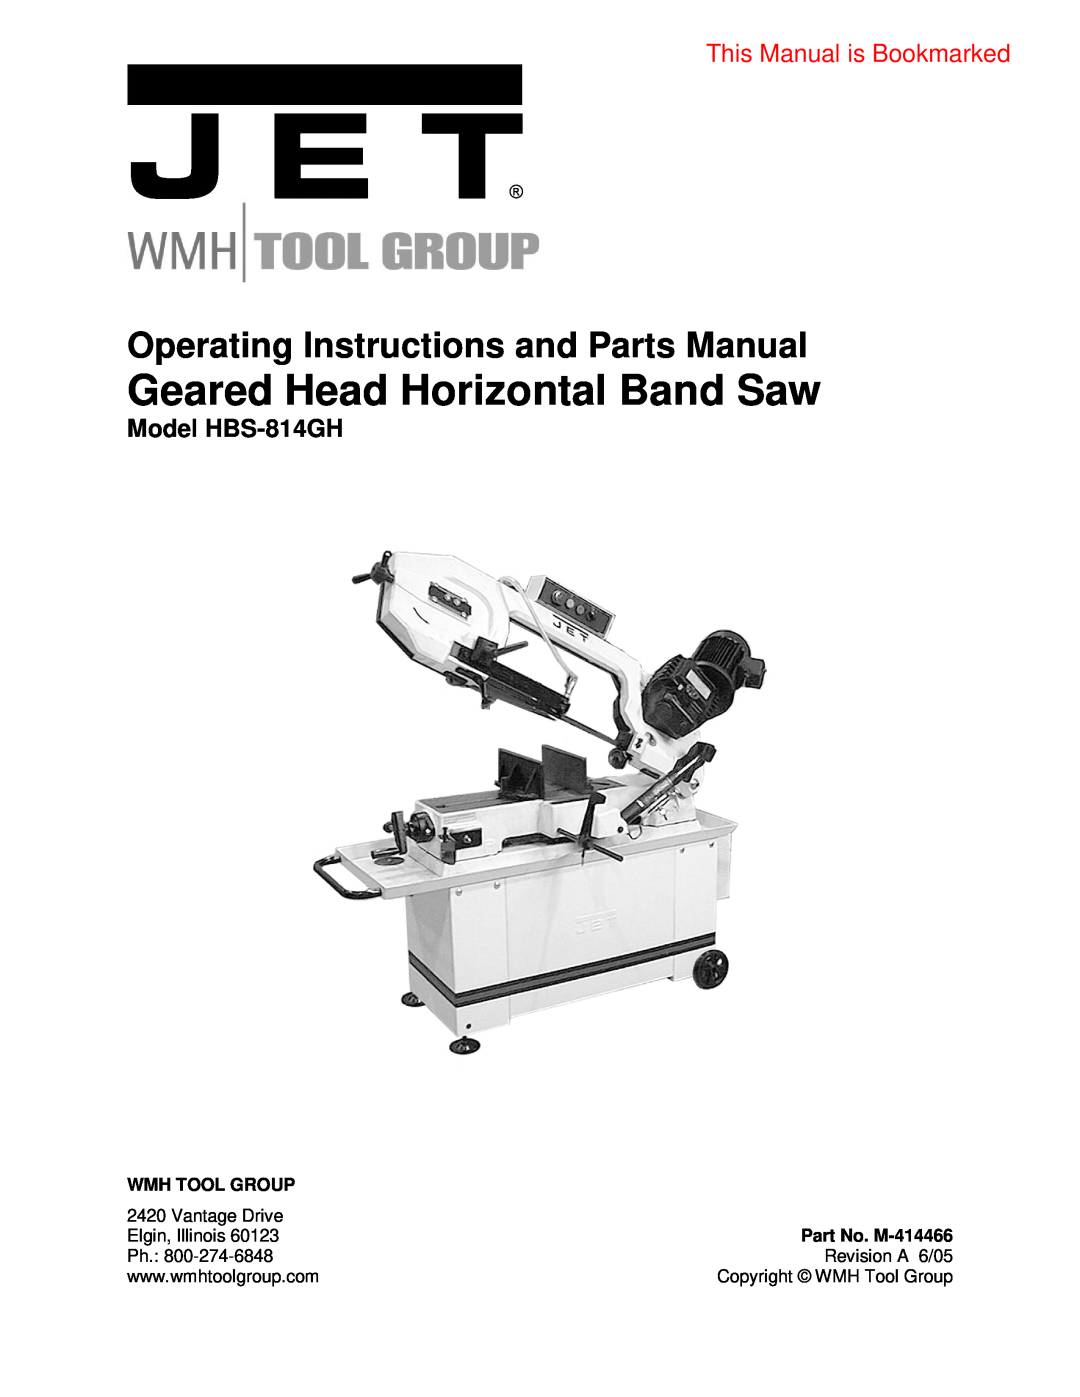 Jet Tools operating instructions Model HBS-814GH, Wmh Tool Group, Part No. M-414466, Geared Head Horizontal Band Saw 